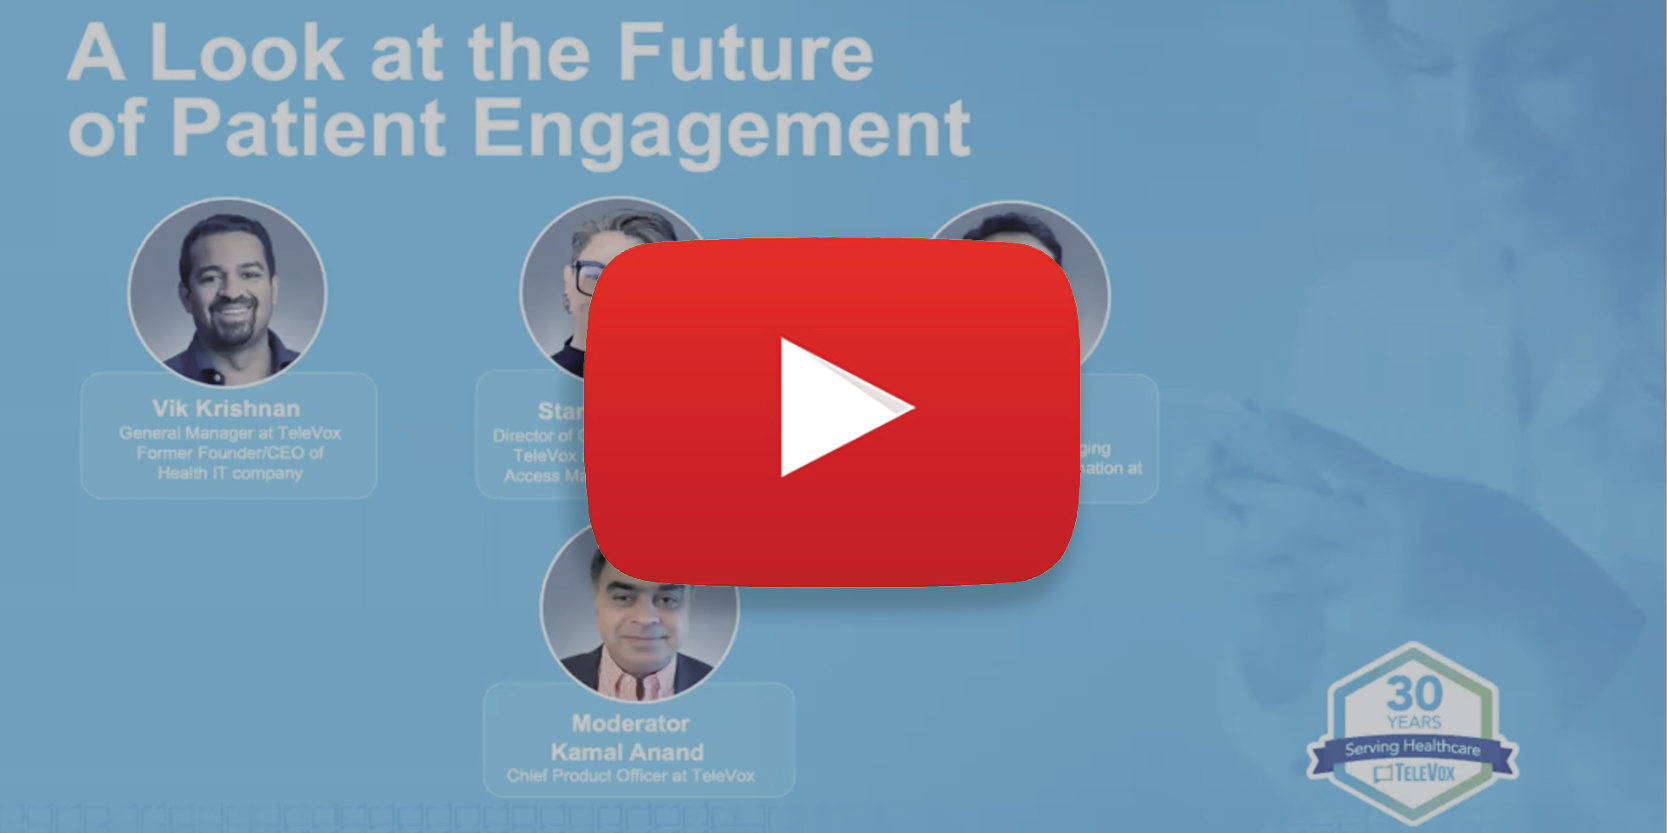 A look at the Future of Patient Engagement